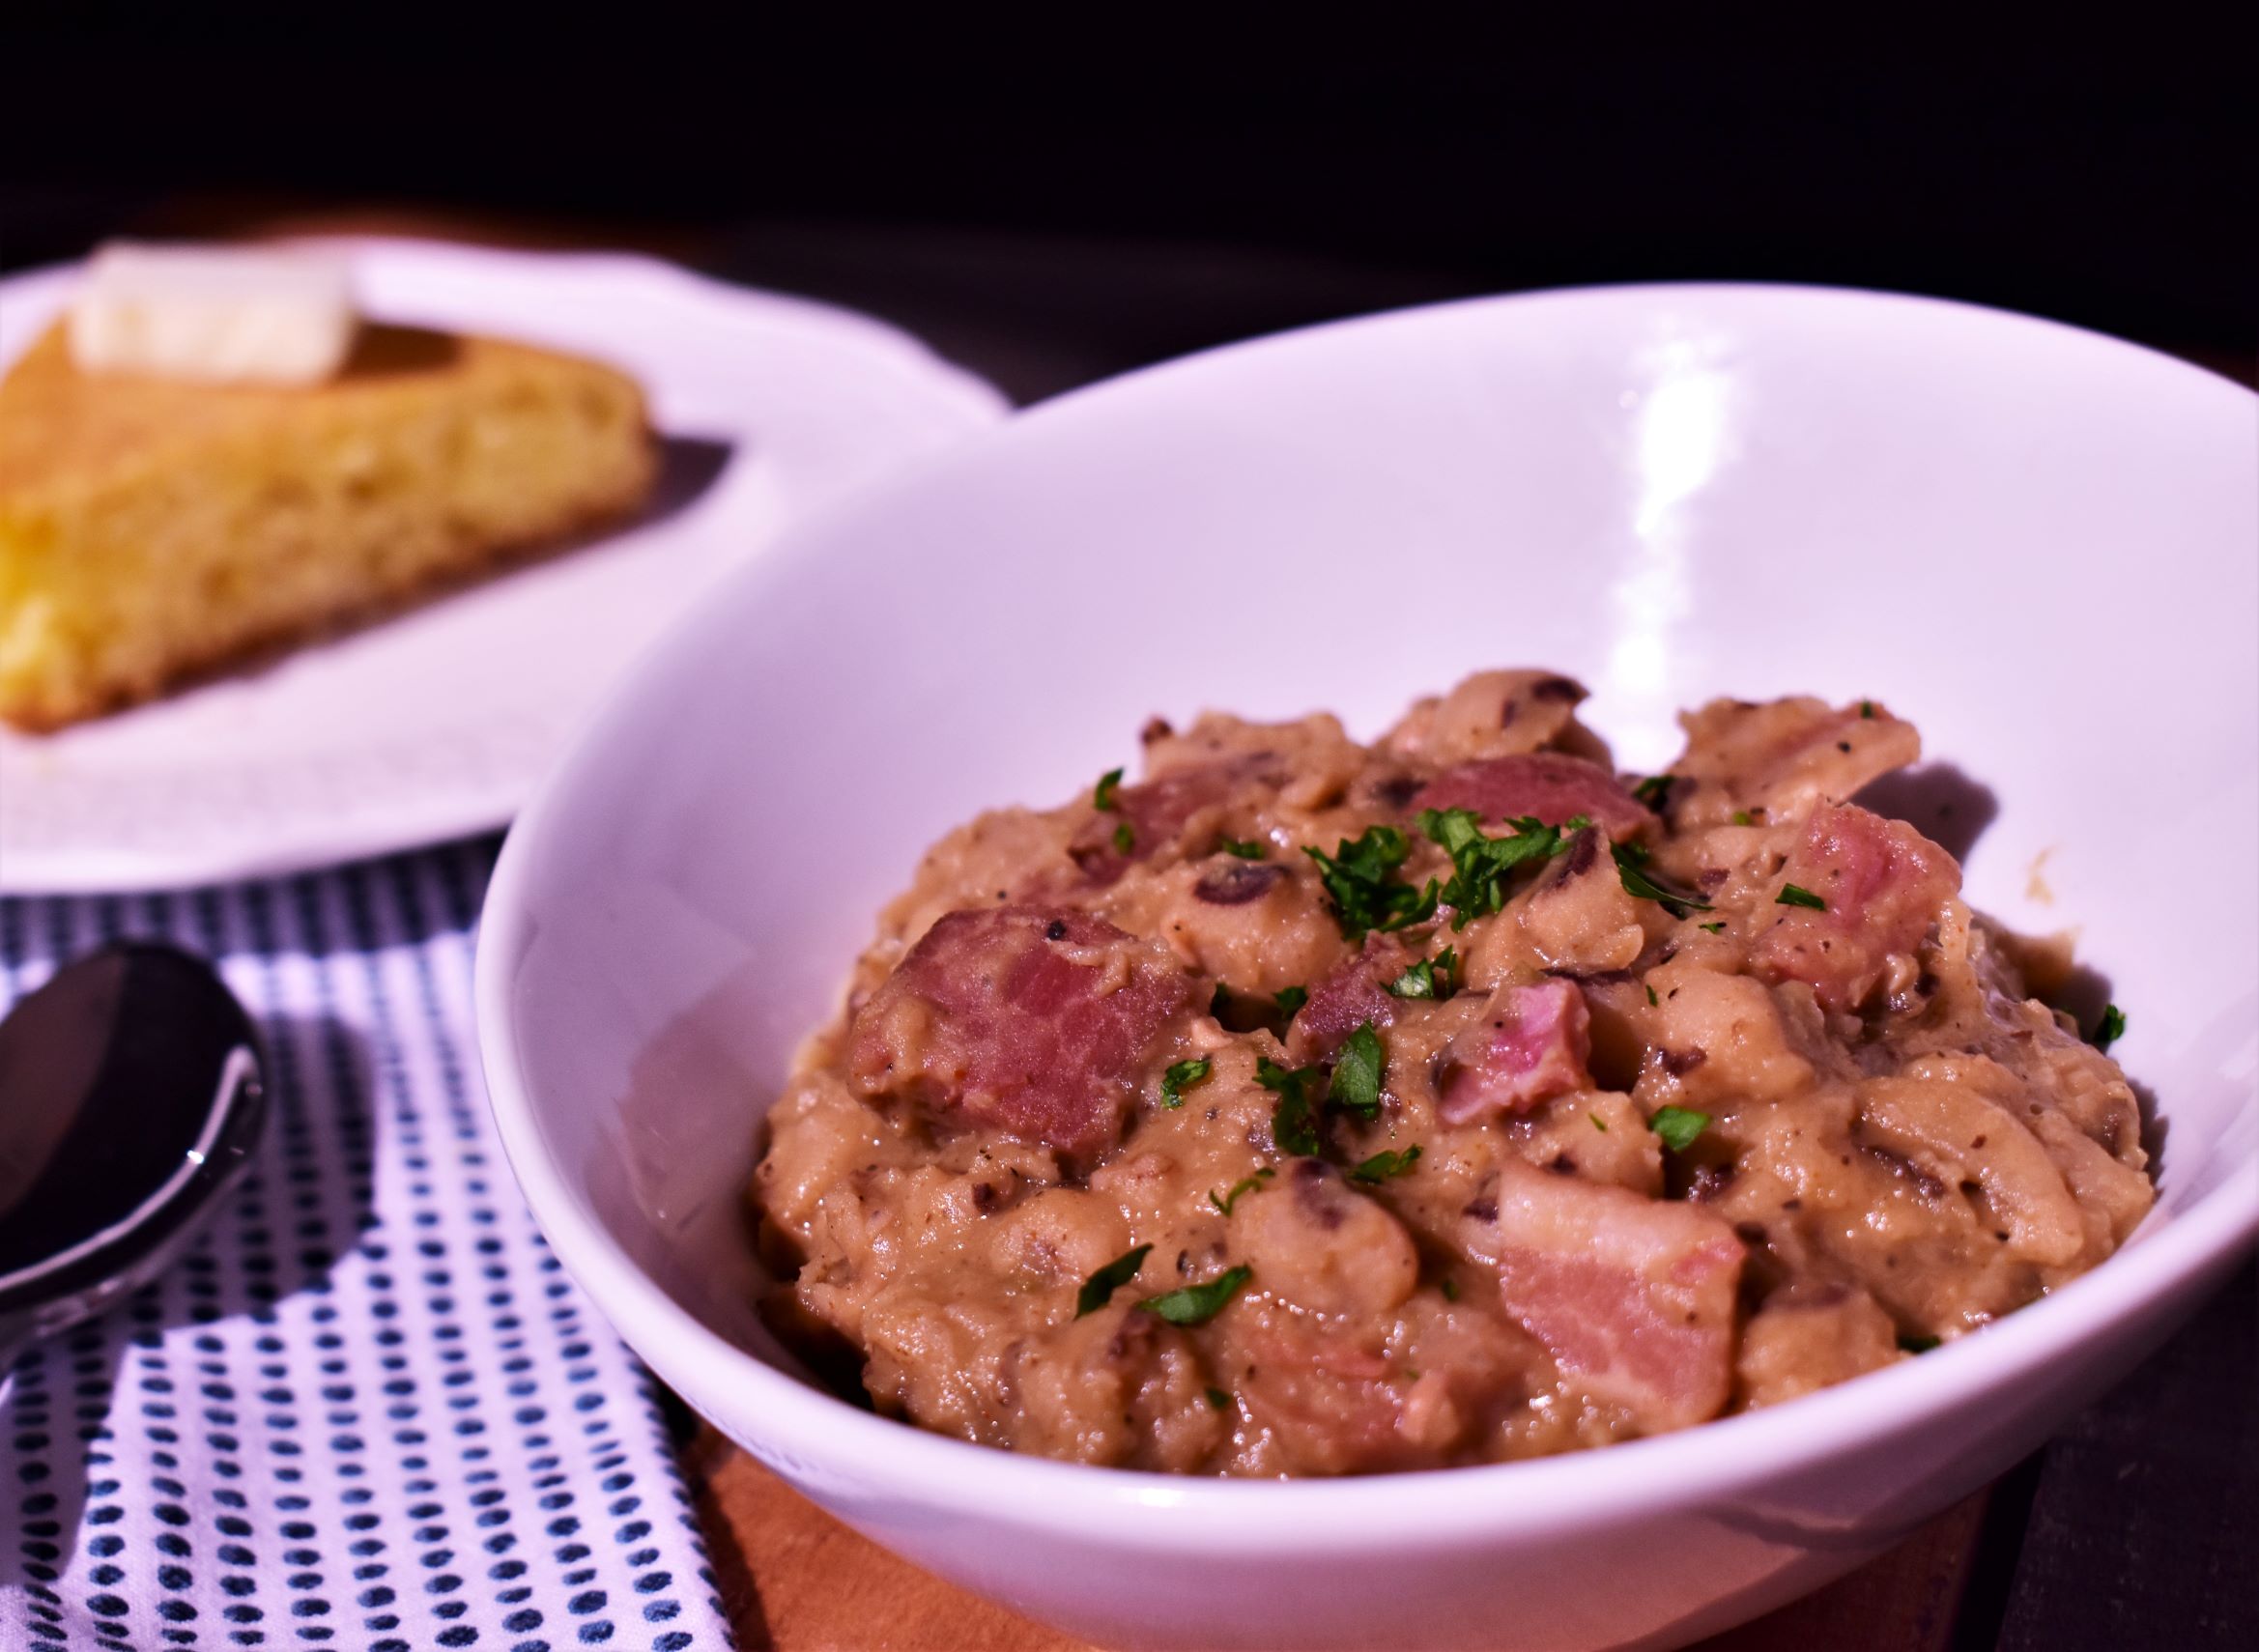 Black-Eyed Peas with Slab Bacon and Tasso